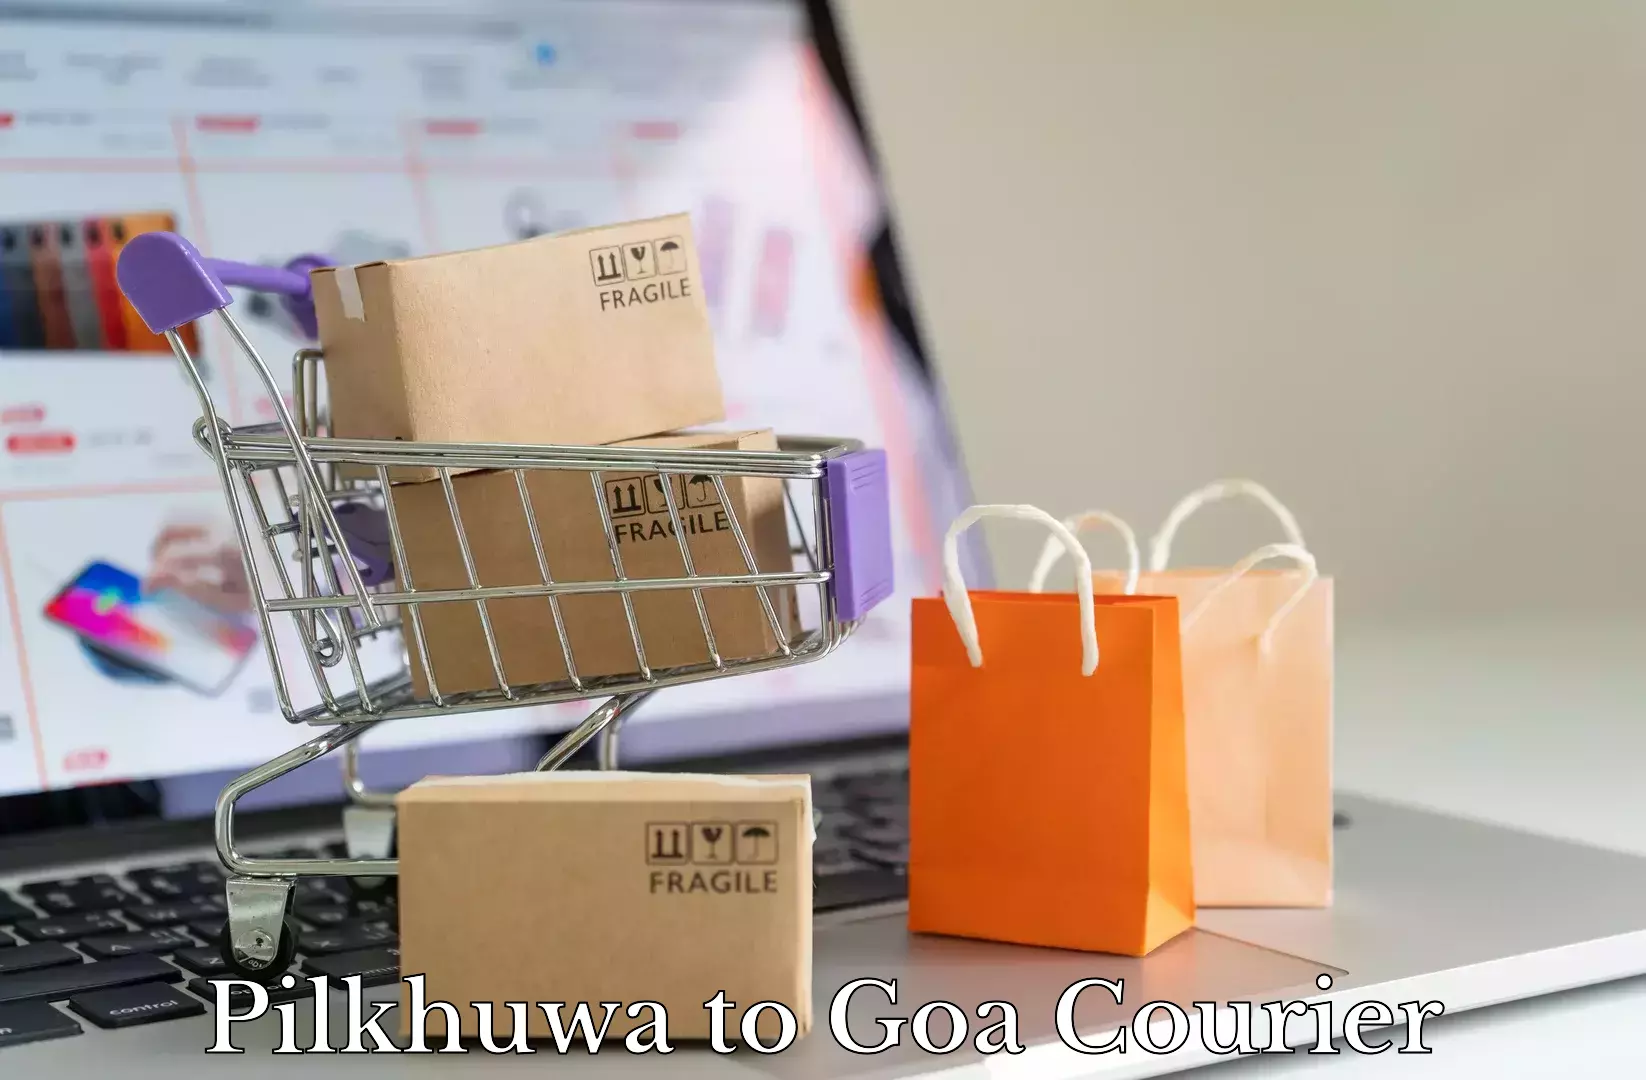 Cost-effective moving options Pilkhuwa to Goa